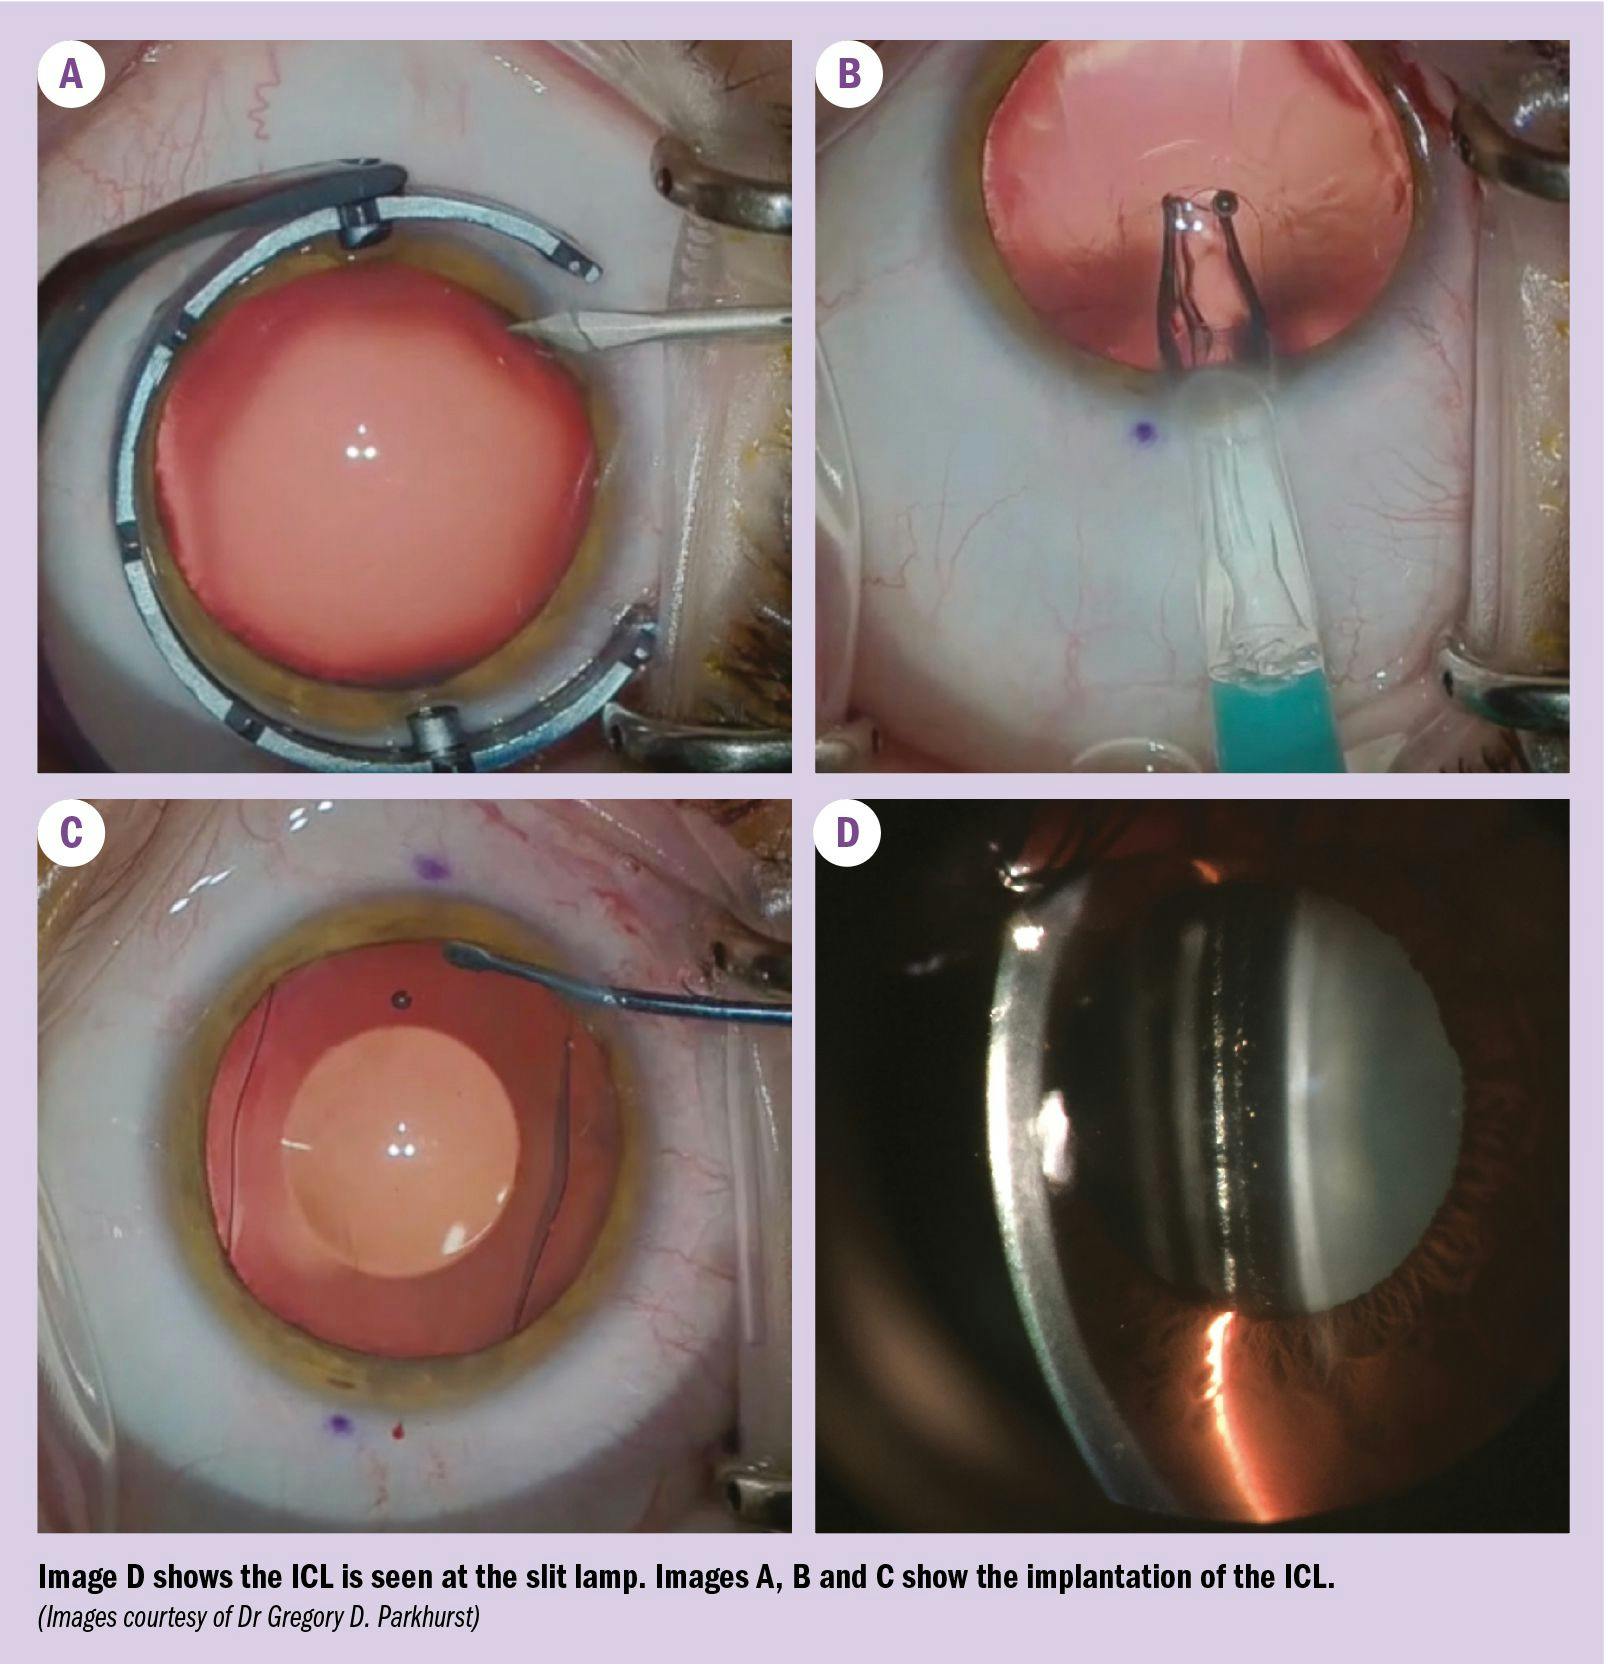 Image D shows the ICL is seen at the slit lamp.  Images A, B and C show the implantation of the ICL. 